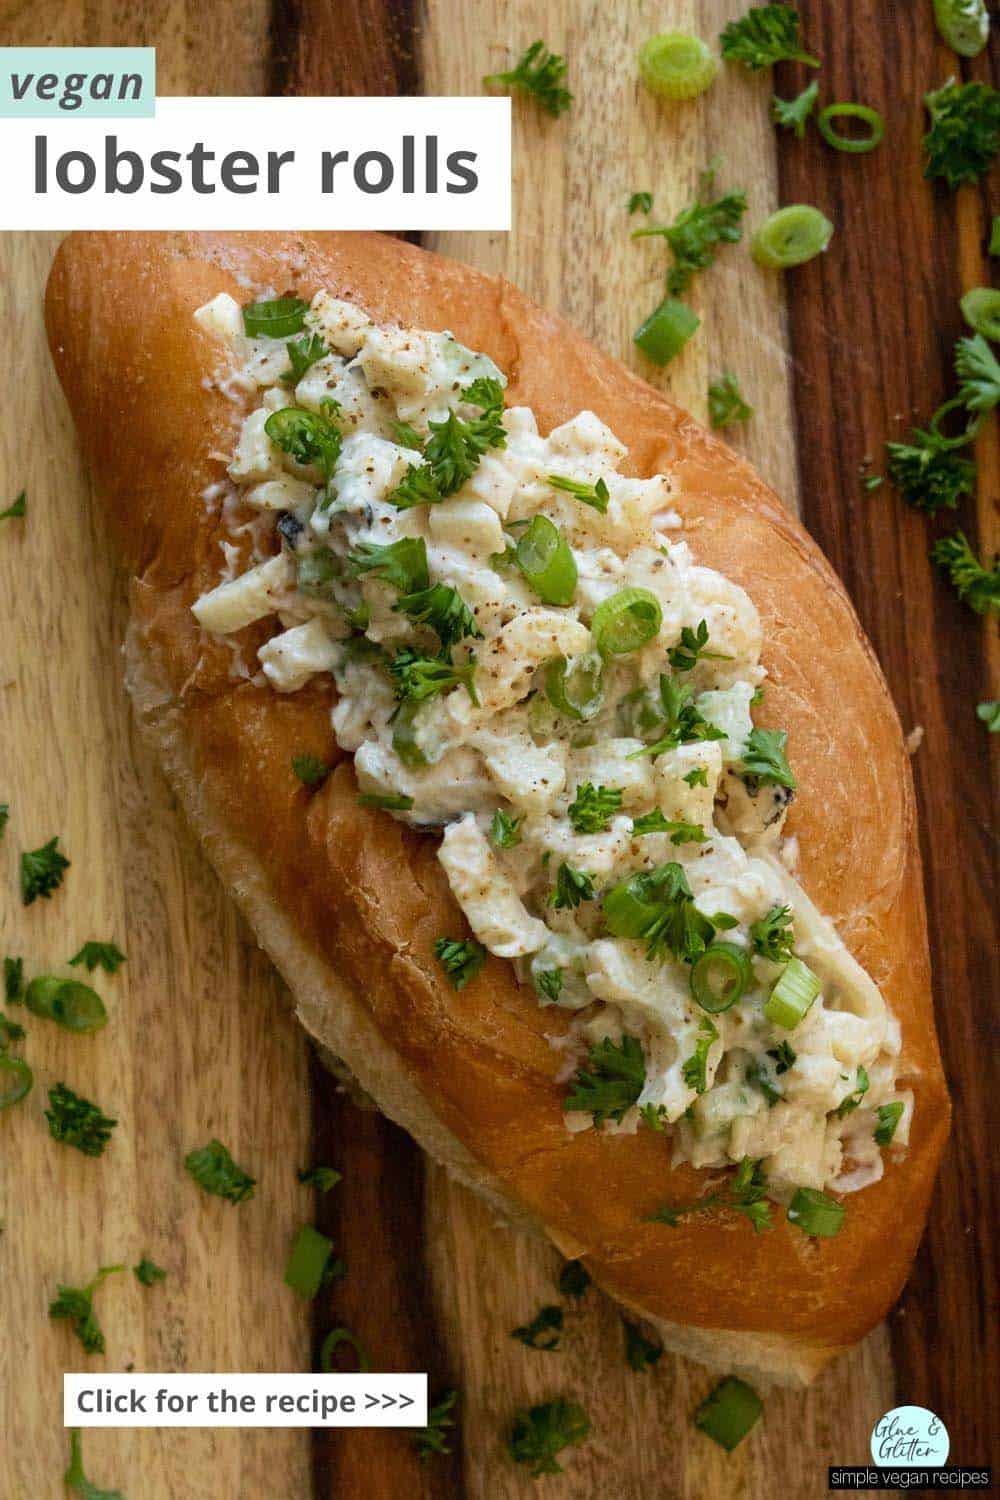 close-up of a vegan lobster roll on a wooden tabletop sprinkled with green onion and parsley, text overlay